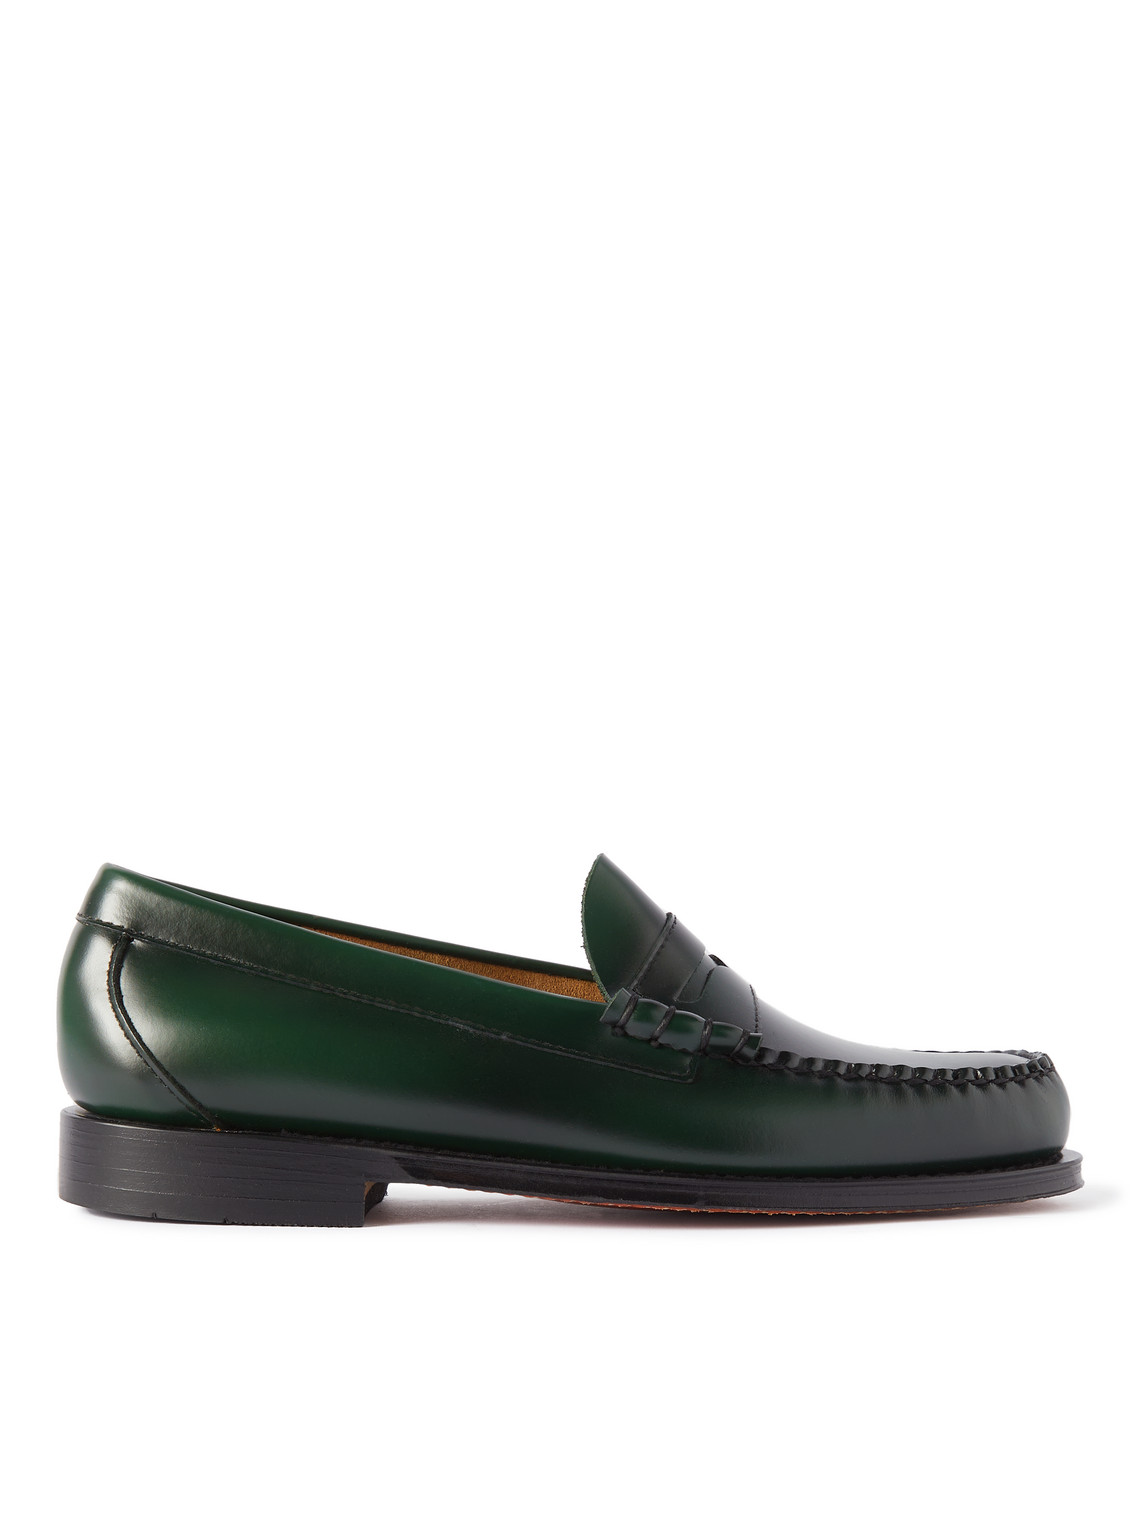 G.H. BASS & CO. WEEJUN HERITAGE LARSON LEATHER PENNY LOAFERS